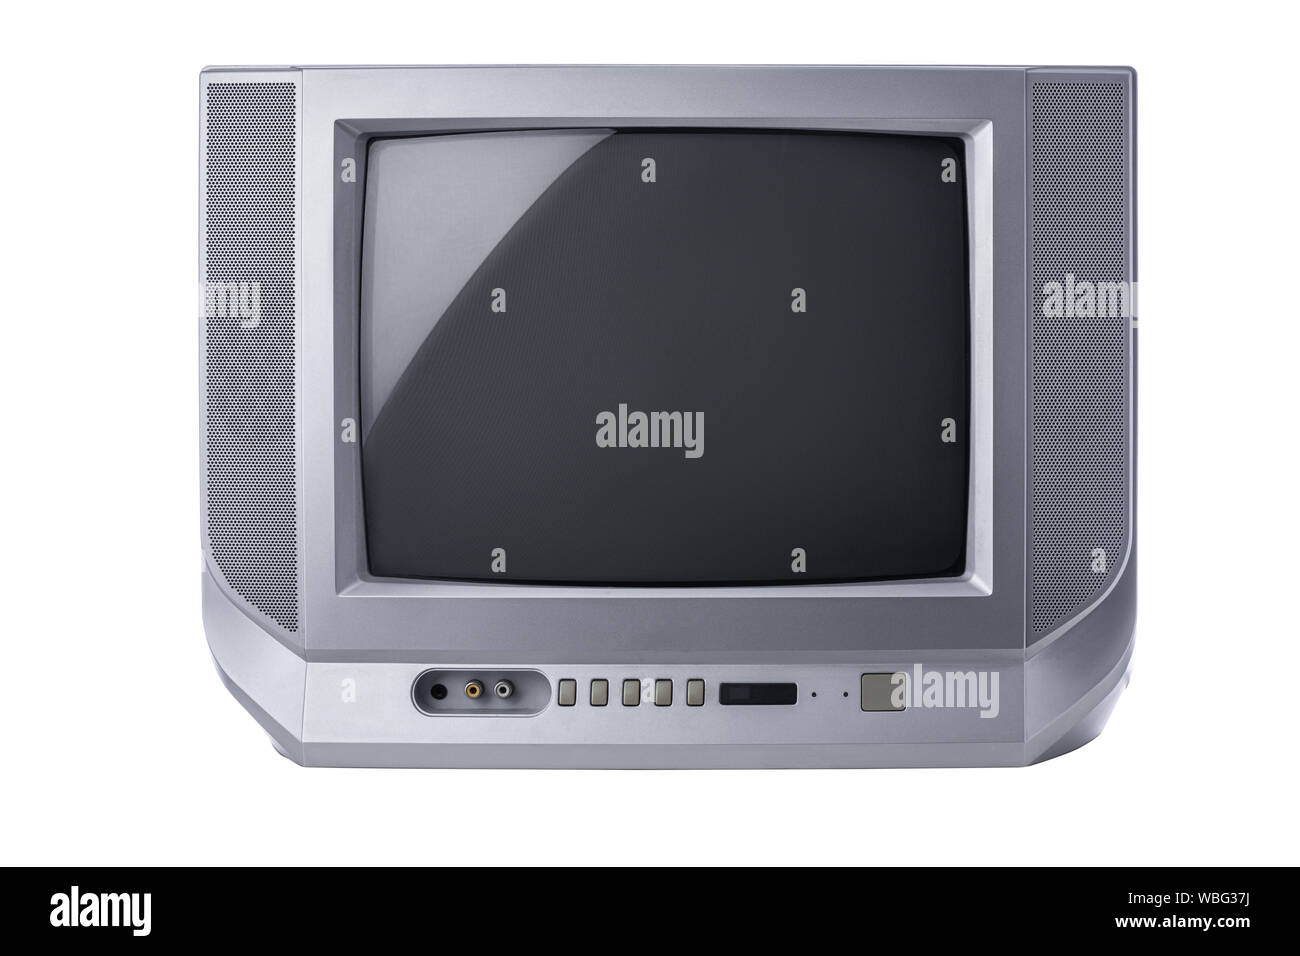 Isolated portable tv set with antenna Stock Photo - Alamy